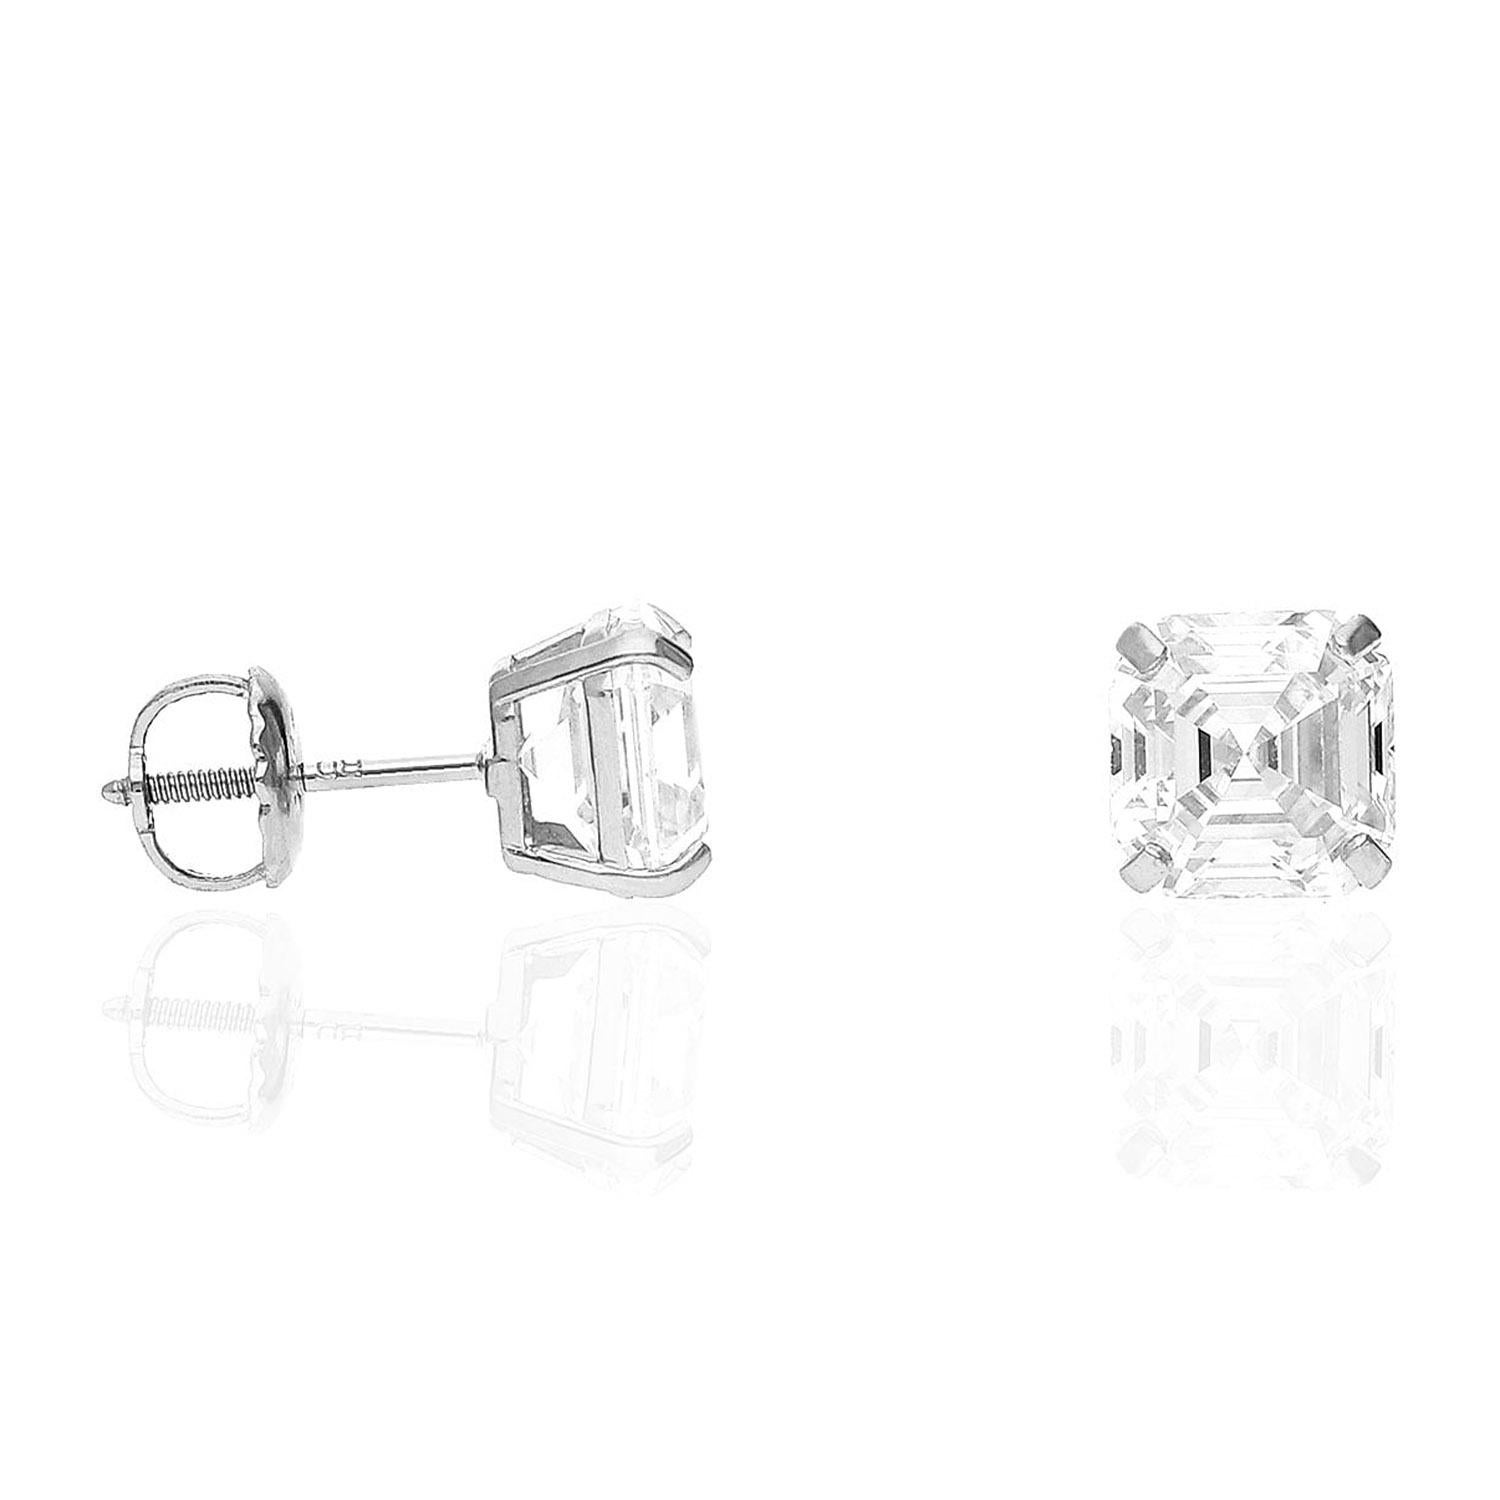 An exquisite GIA certified 6.09 total carat pair of asscher cut diamonds is gorgeously sophisticated and is exceptionally clean with Internally Flawless VVS1 clarity! The diamonds are graded D/F for color, and they face up with very minimal warmth.